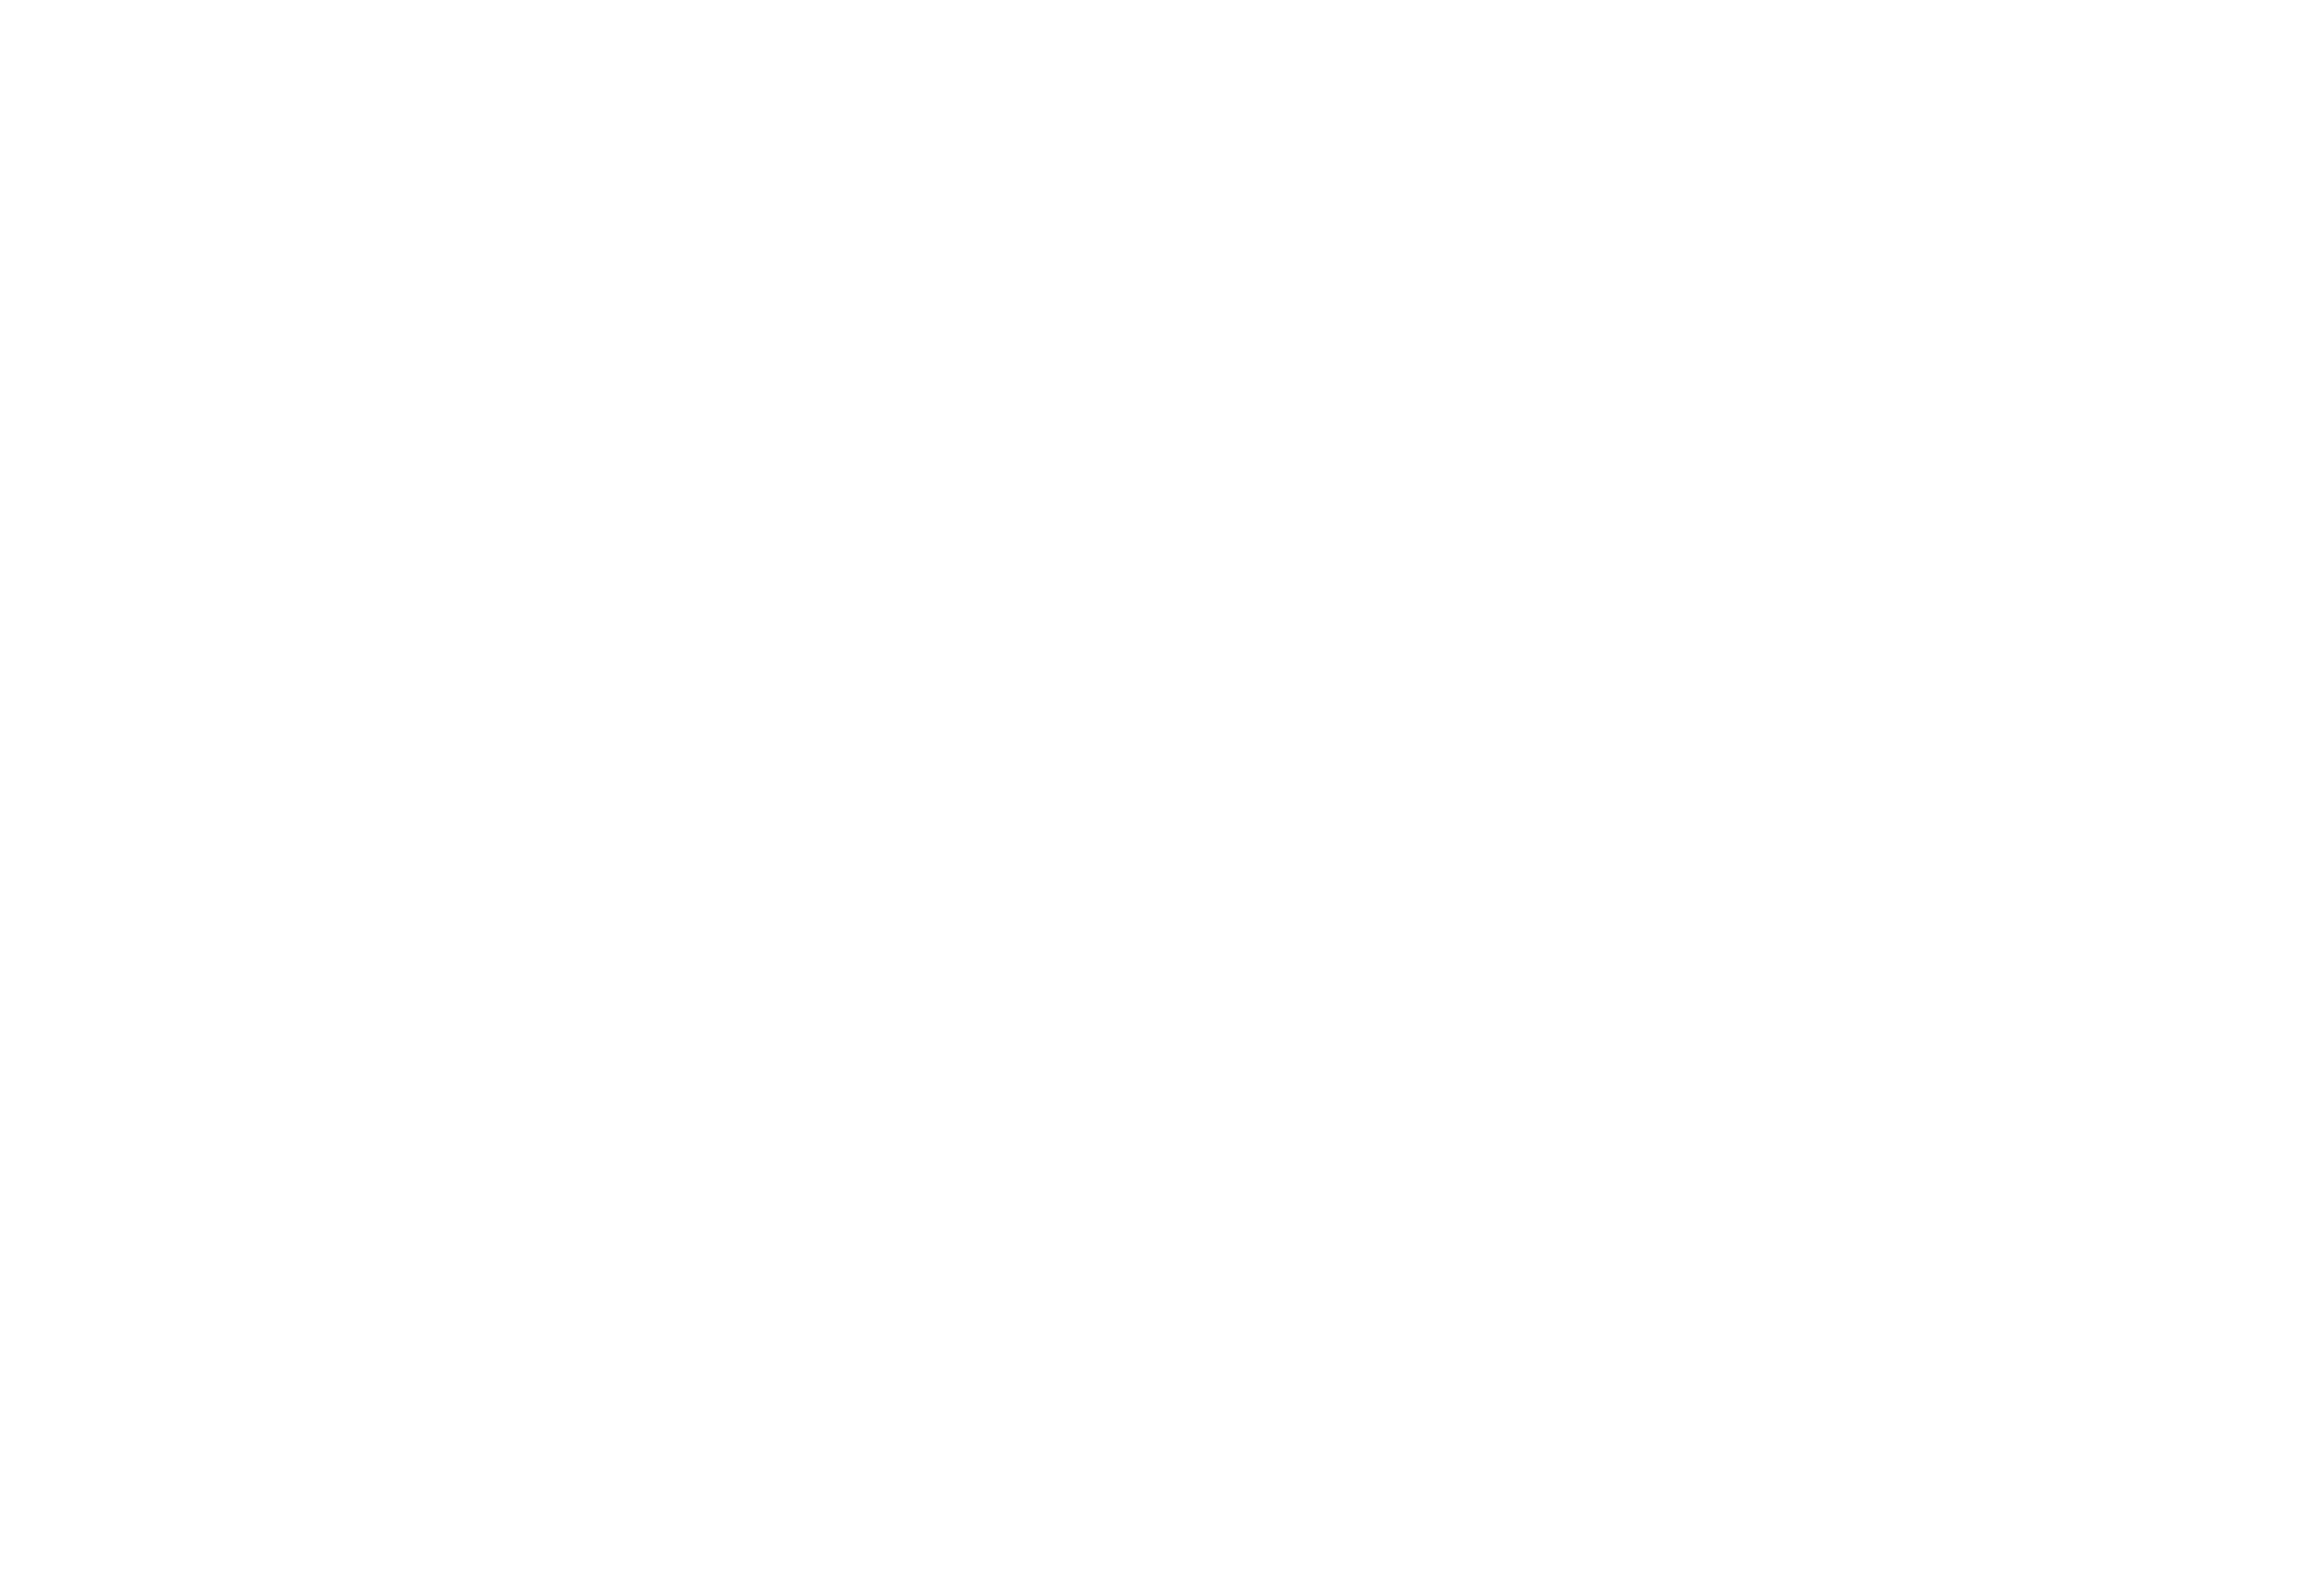 Humanity & Inclusion